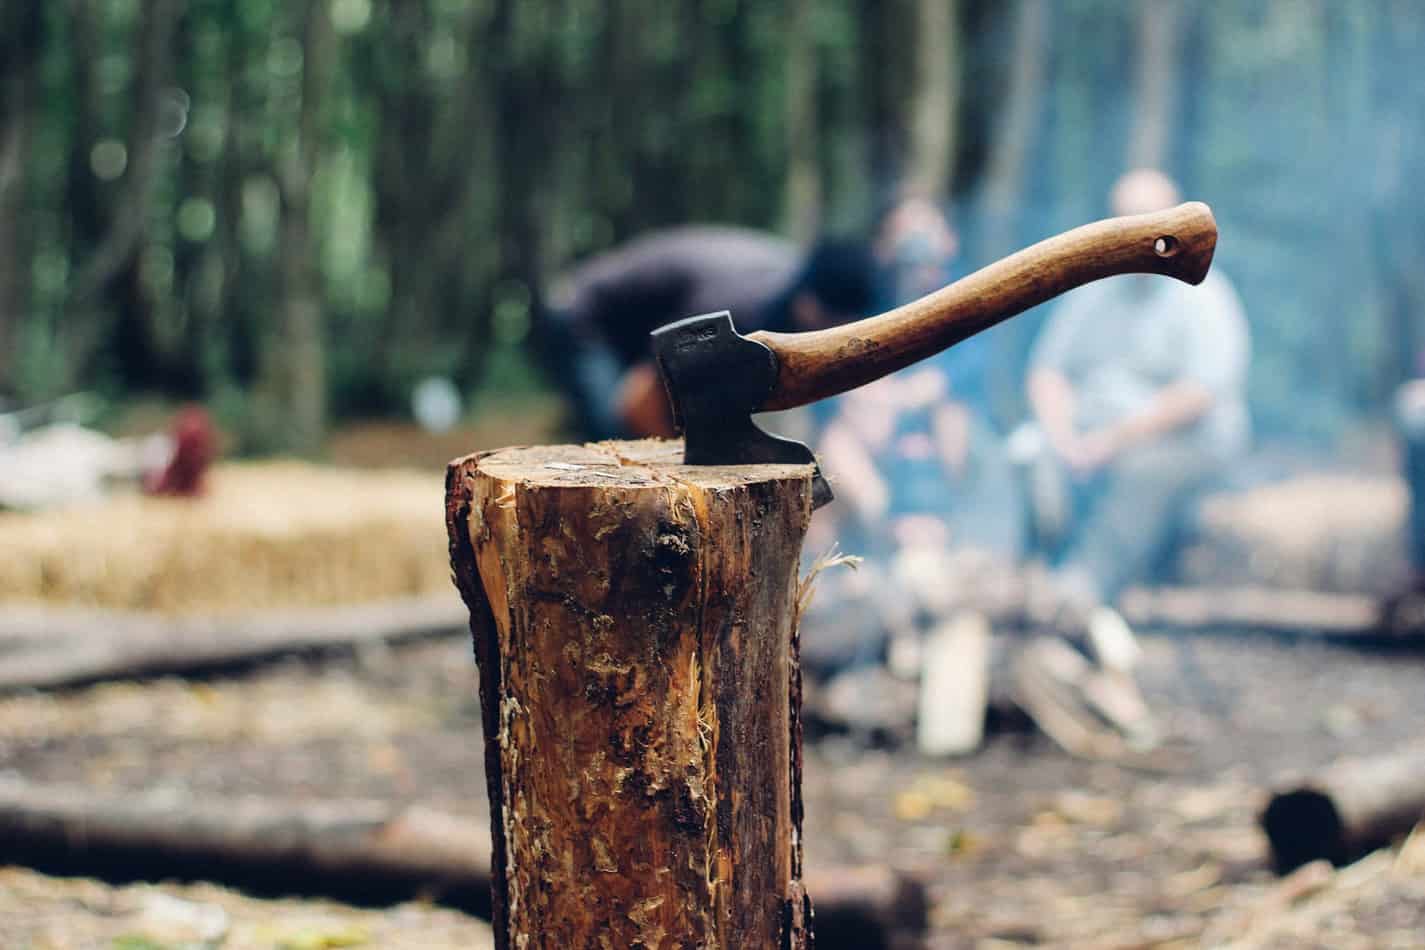 Hatchet Vs Knife | Which Tool Is Better For Survival?